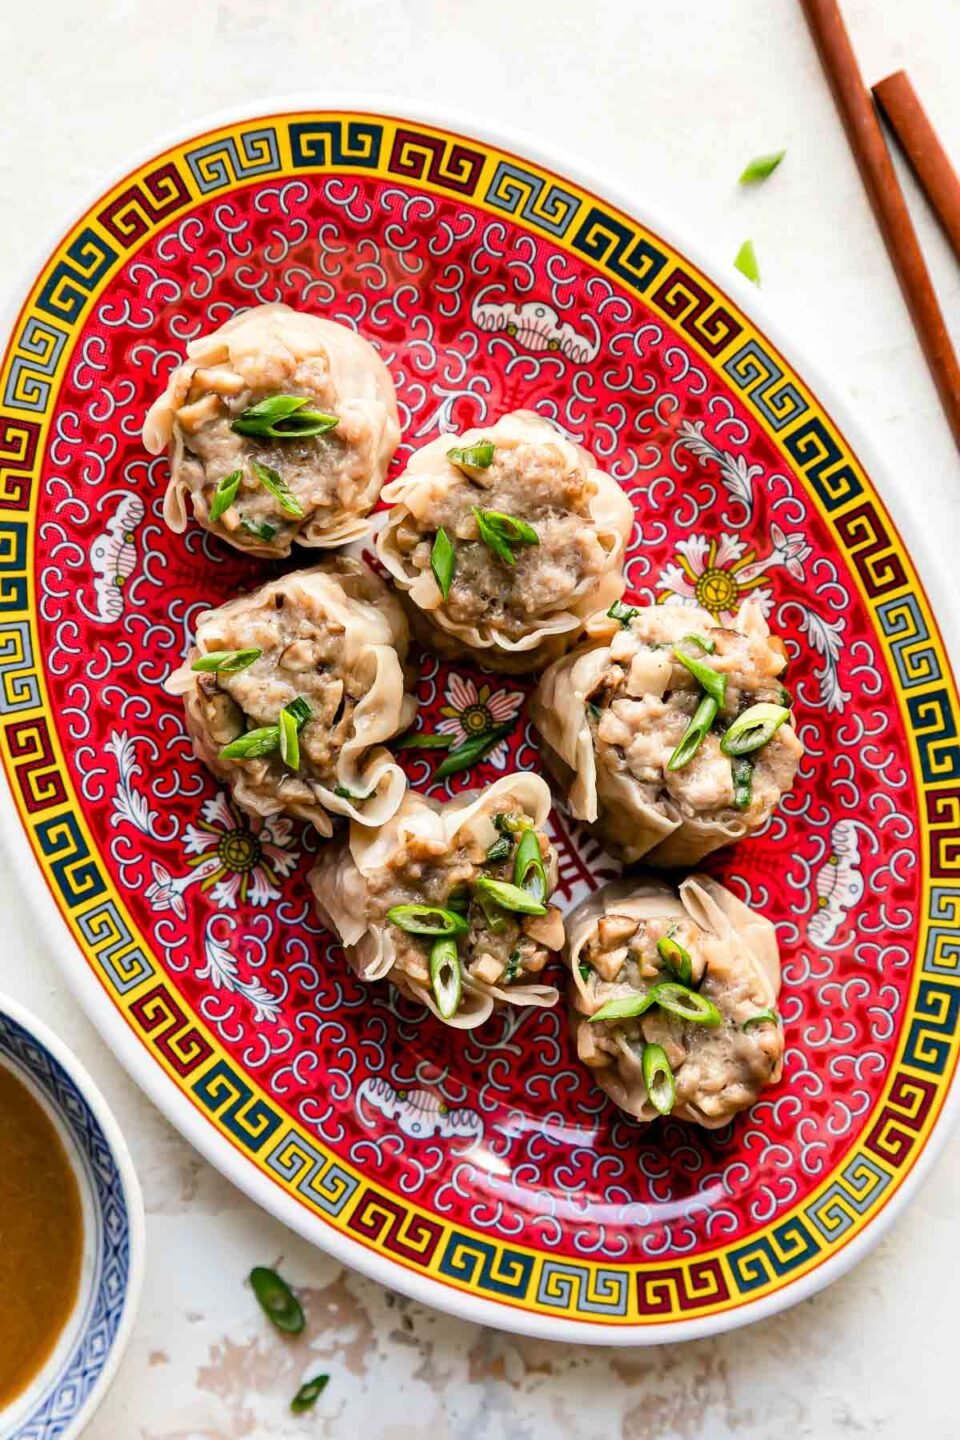 Six pork shumai dumplings rest atop a colorful platter that sits atop a creamy white textured surface. The pork shumai dumplings have been garnished with sliced green onions. A pair of wooden chopsticks rest alongside the platter and a small blue and white bowl filled with siu mai sauce rests alongside the platter.